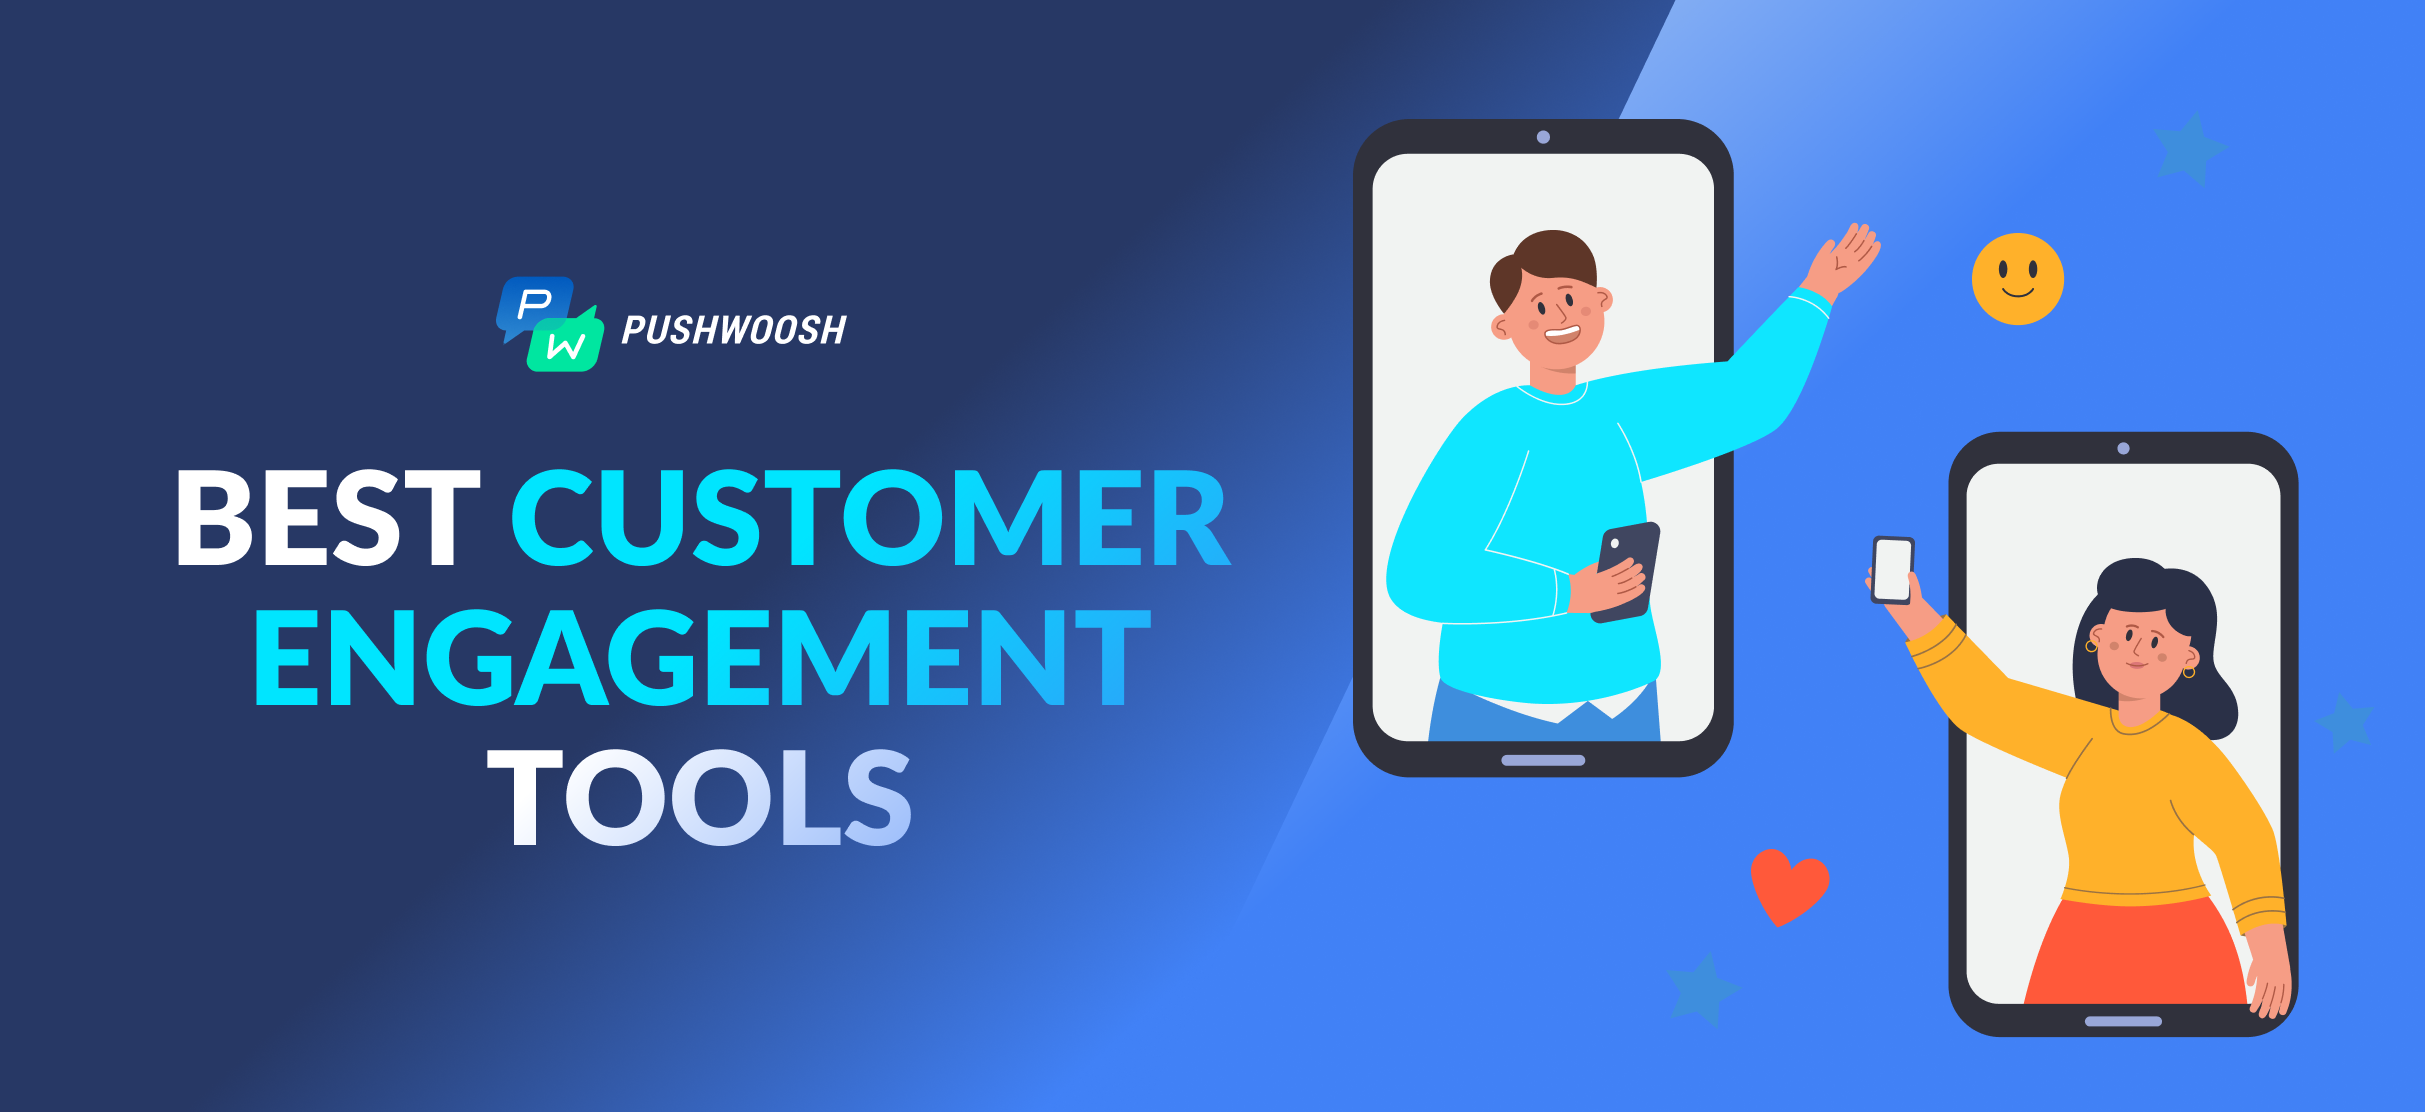 21 Best Customer Engagement Tools for Your Business Needs